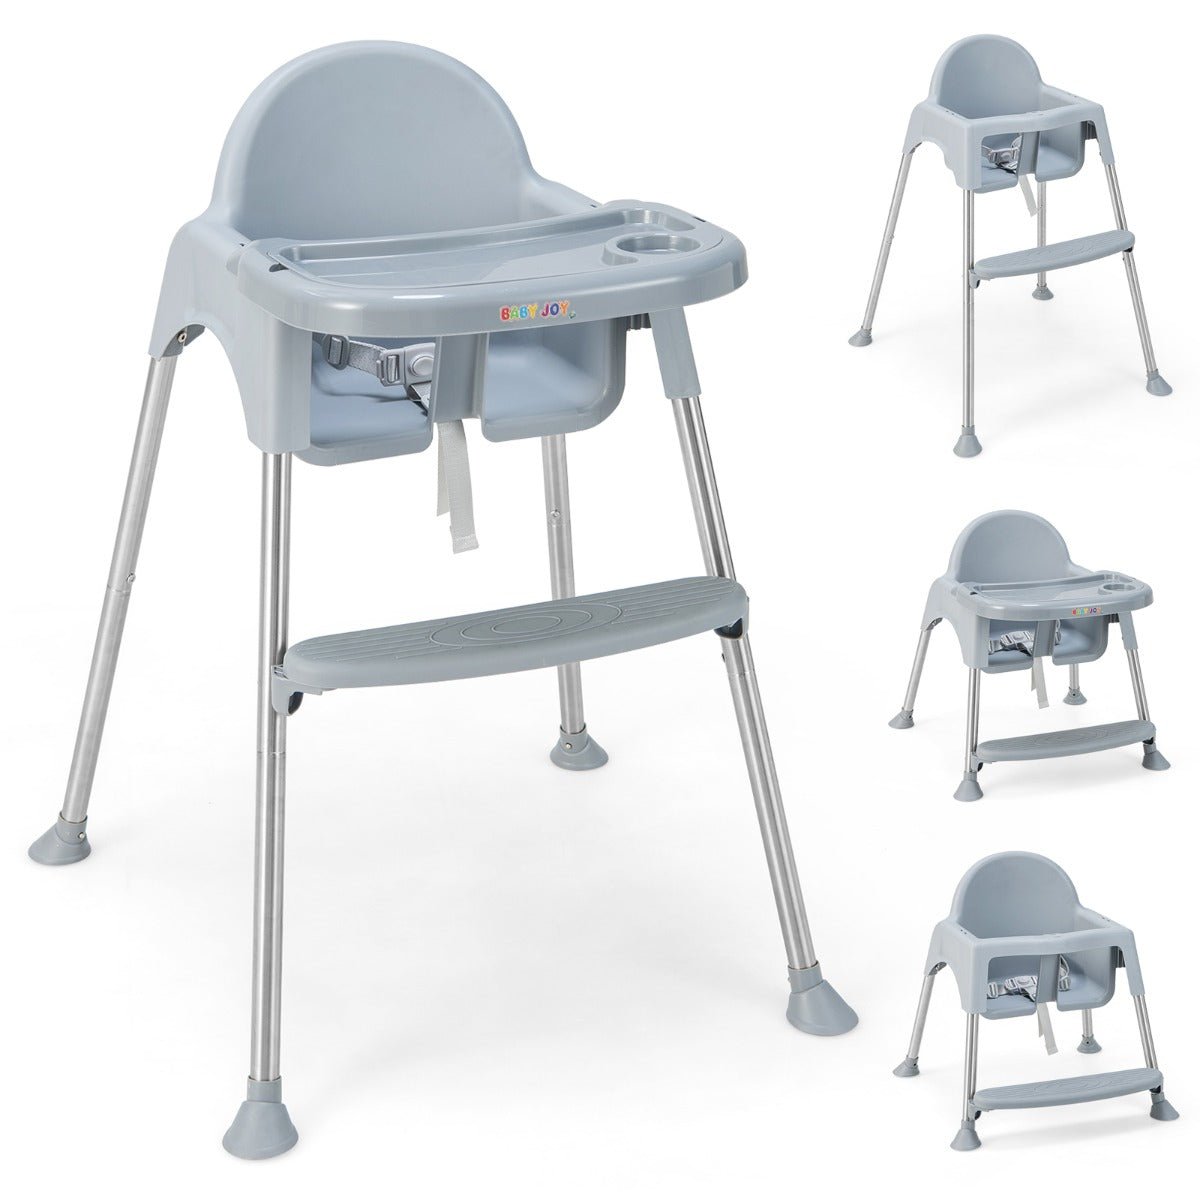 Shop Grey 4-in-1 Convertible Baby High Chair with Removable Tray